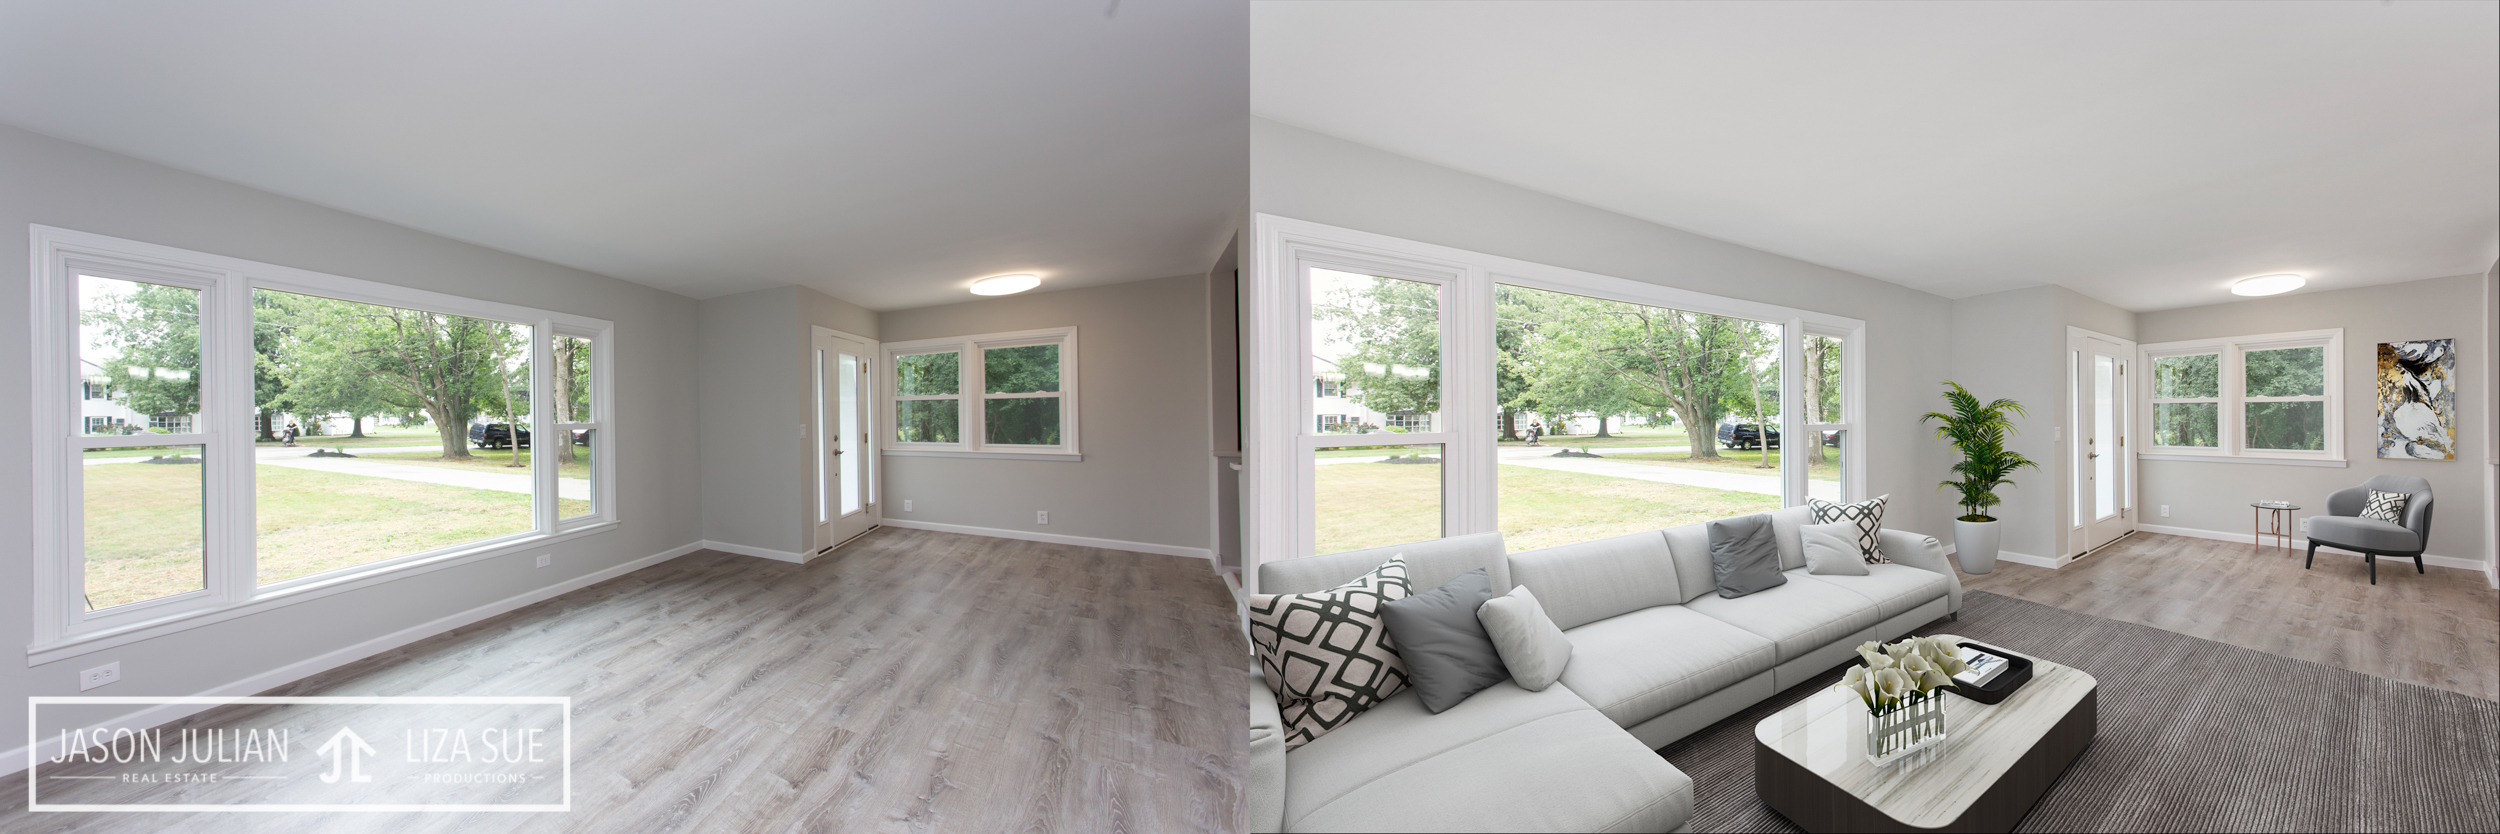 Virtual Staging Cleveland Akron